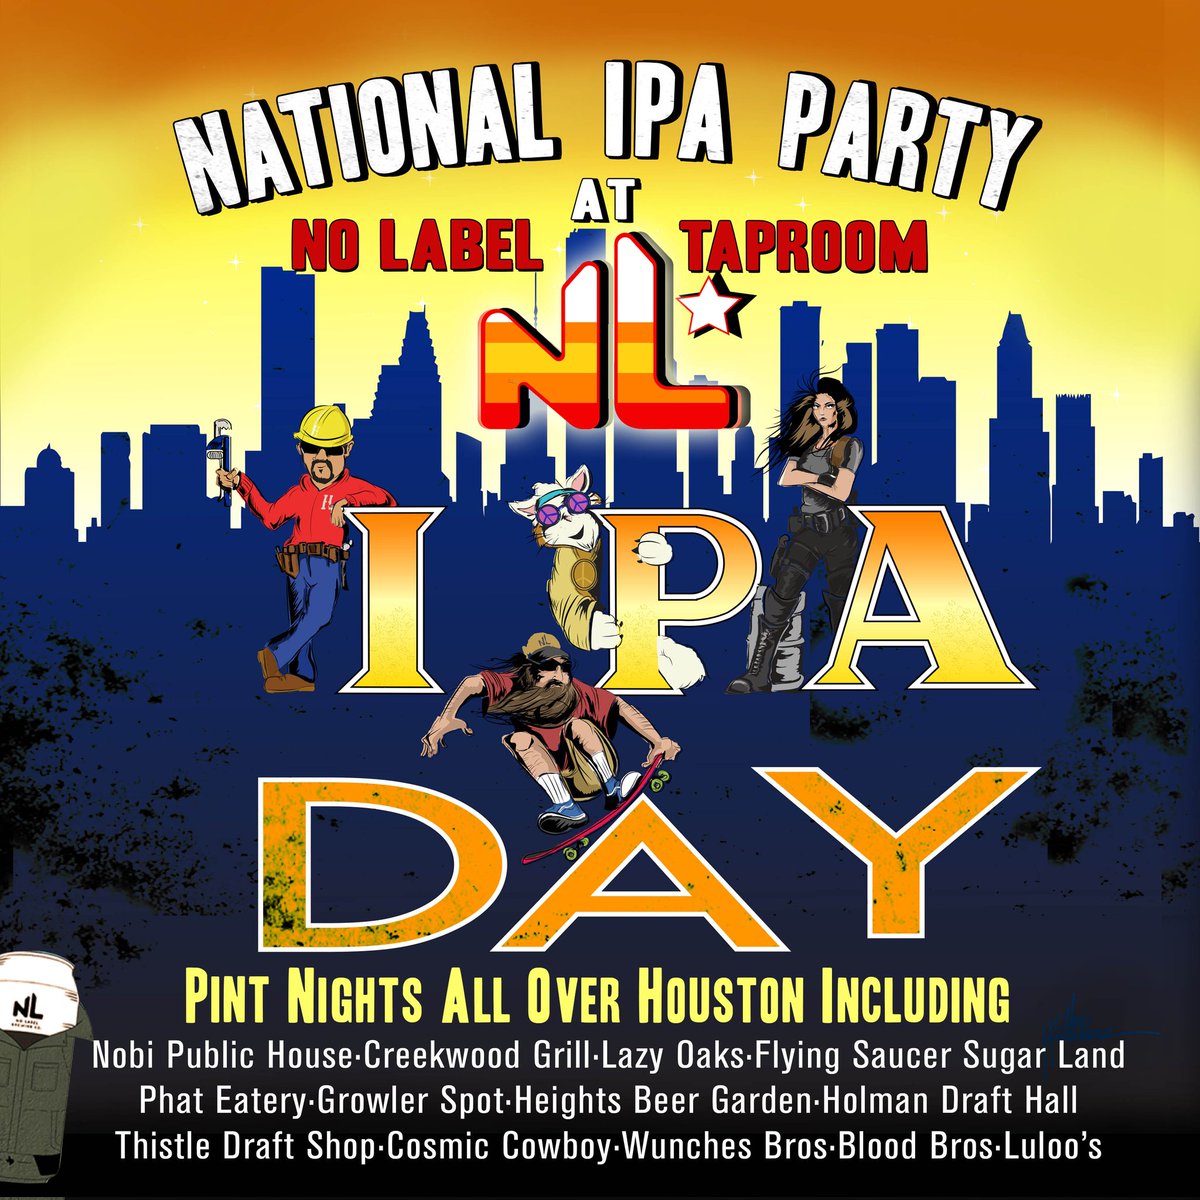 Mark your calendars - NATIONAL IPA DAY is Thursday, August 3rd and we're throwing parties all over the city with our WORLD BEER CUP WINNING WEST COAST IPA, CALI BOY!

IPA DAY PARTY at the taproom with Cali Boy, Sittin' Sidehaze, Warrior Road RYE IPA, Mind Your Own Business Sour… https://t.co/ry0hDFE1YI https://t.co/n1pmuqAkR9